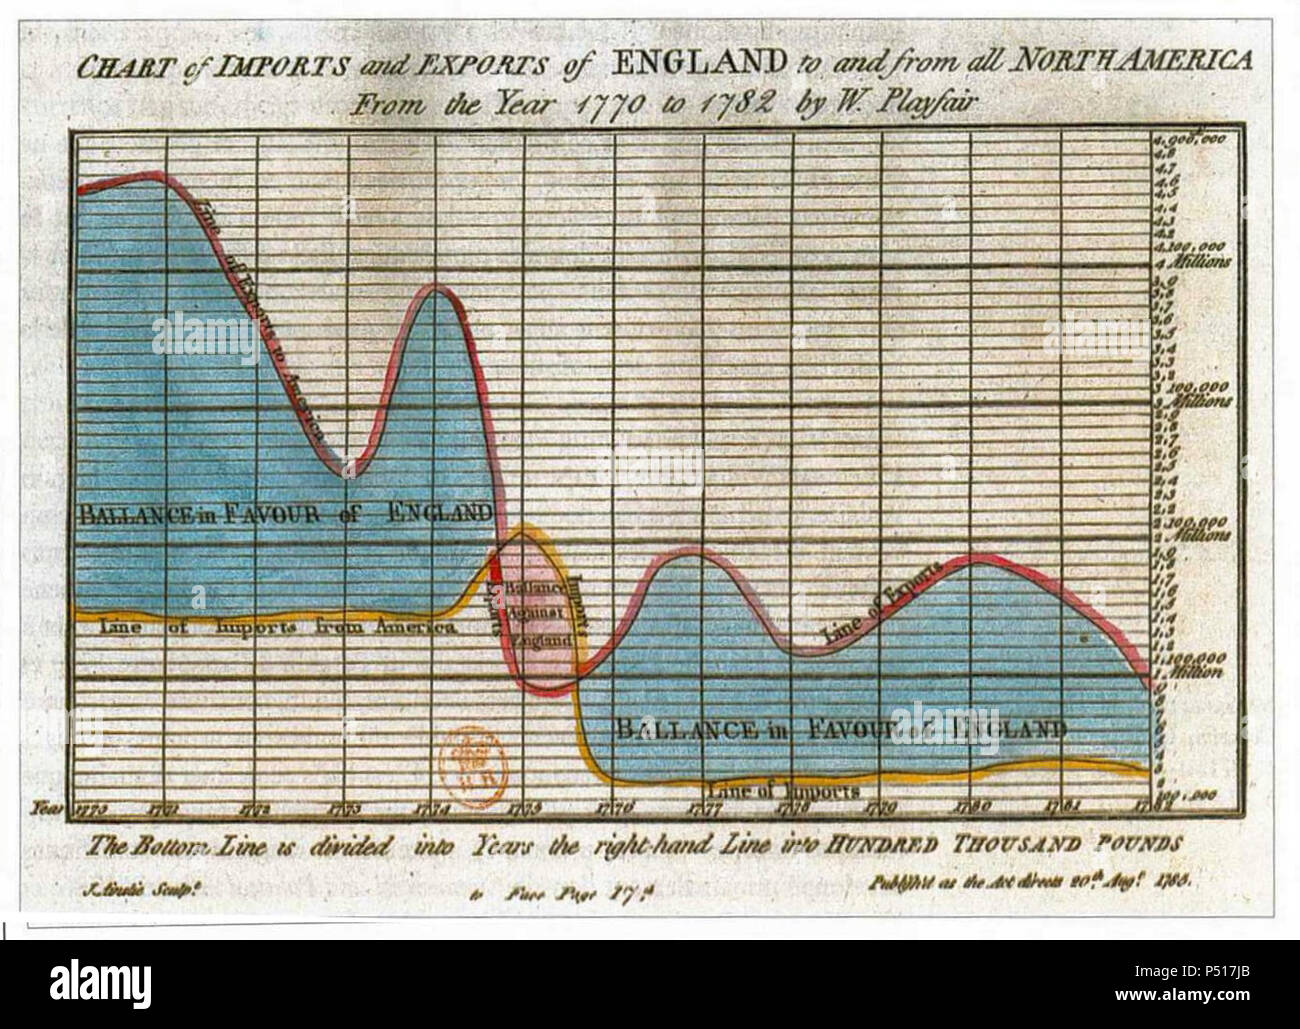 1786 Playfair - Chart of import and exports of England to and from all North America from the year 1770 to 1782. Stock Photo